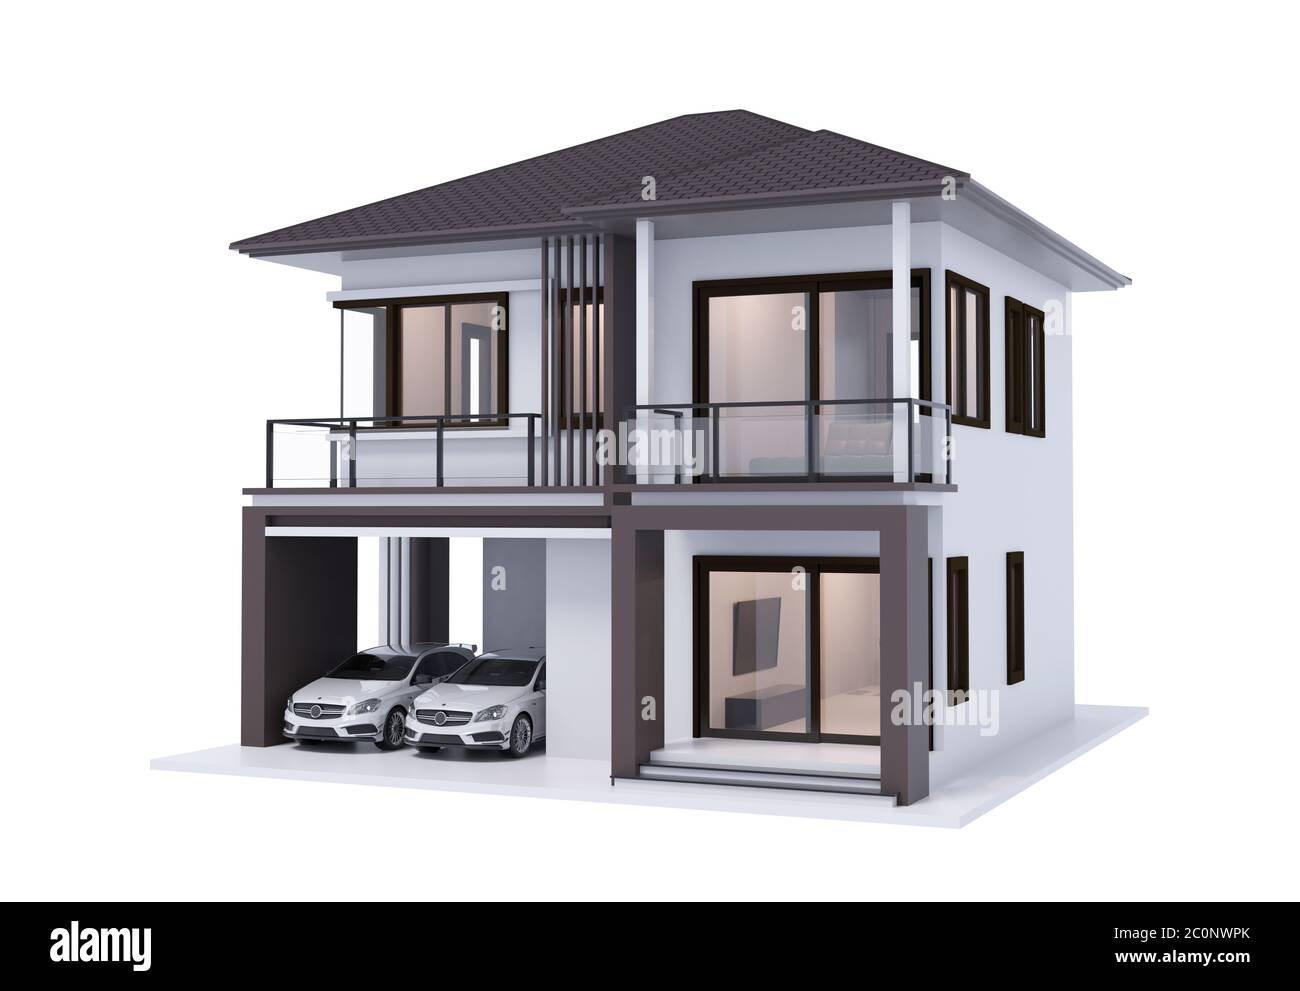 house 3d illustration with white car isolate on white background ...